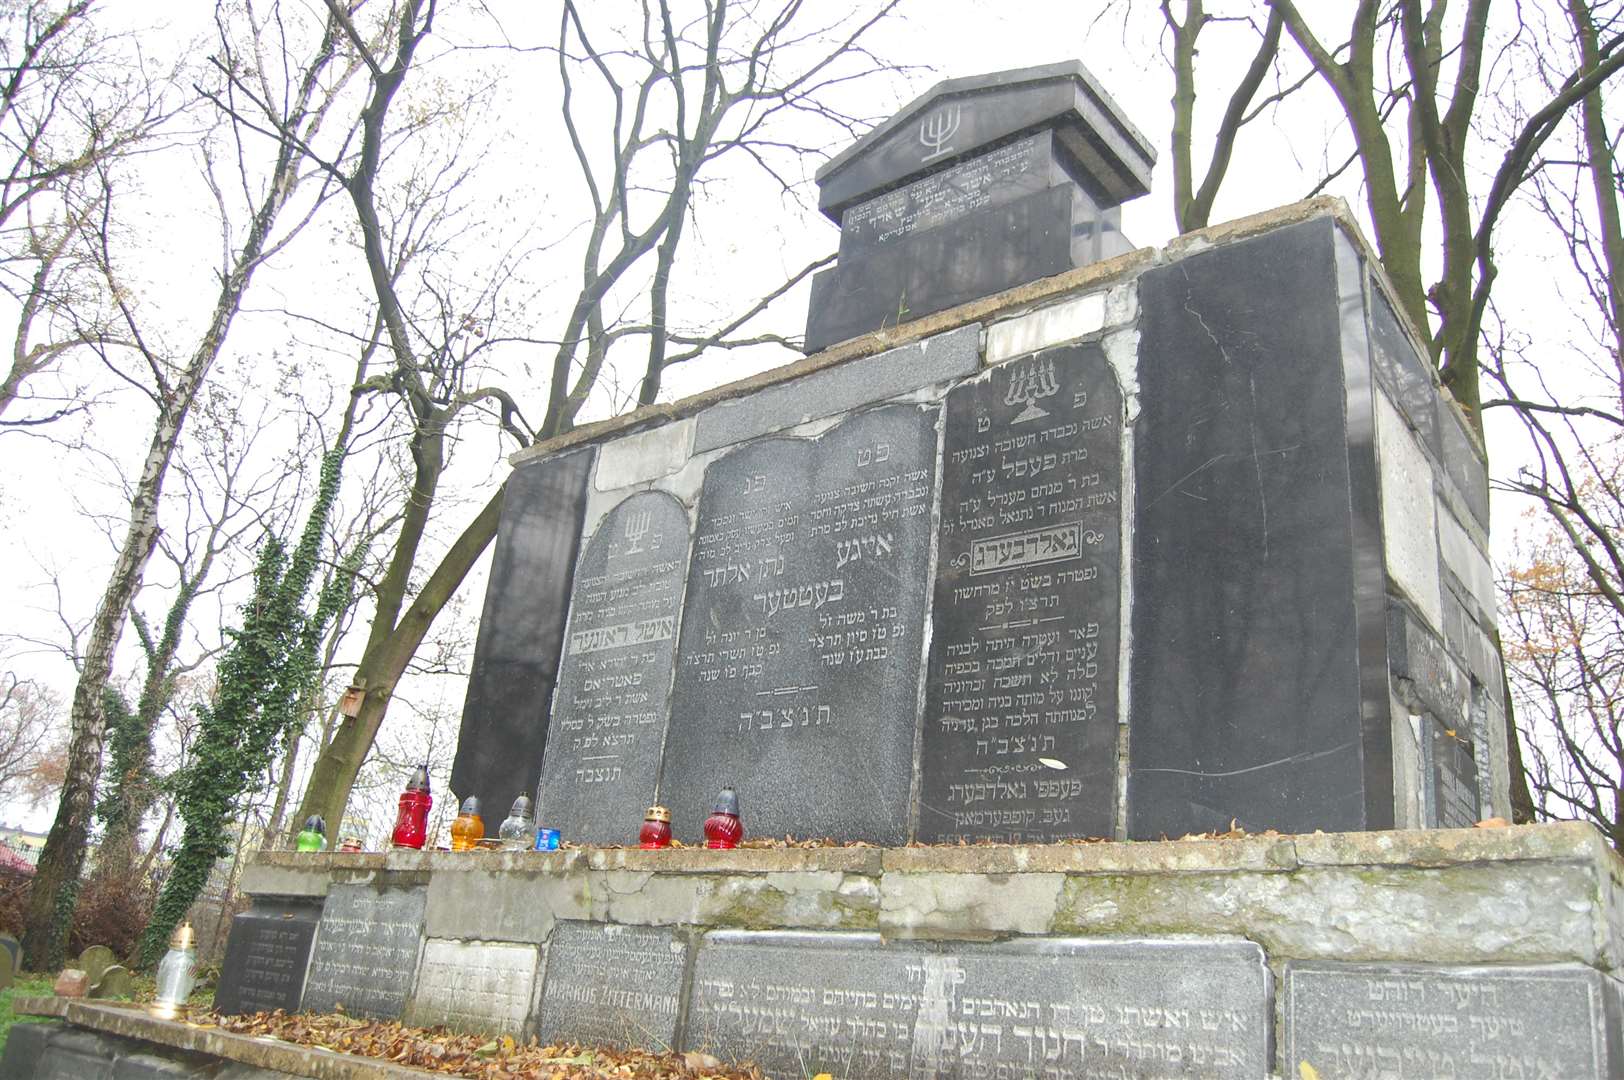 A memorial at a Jewish graveyard just outside the complex.